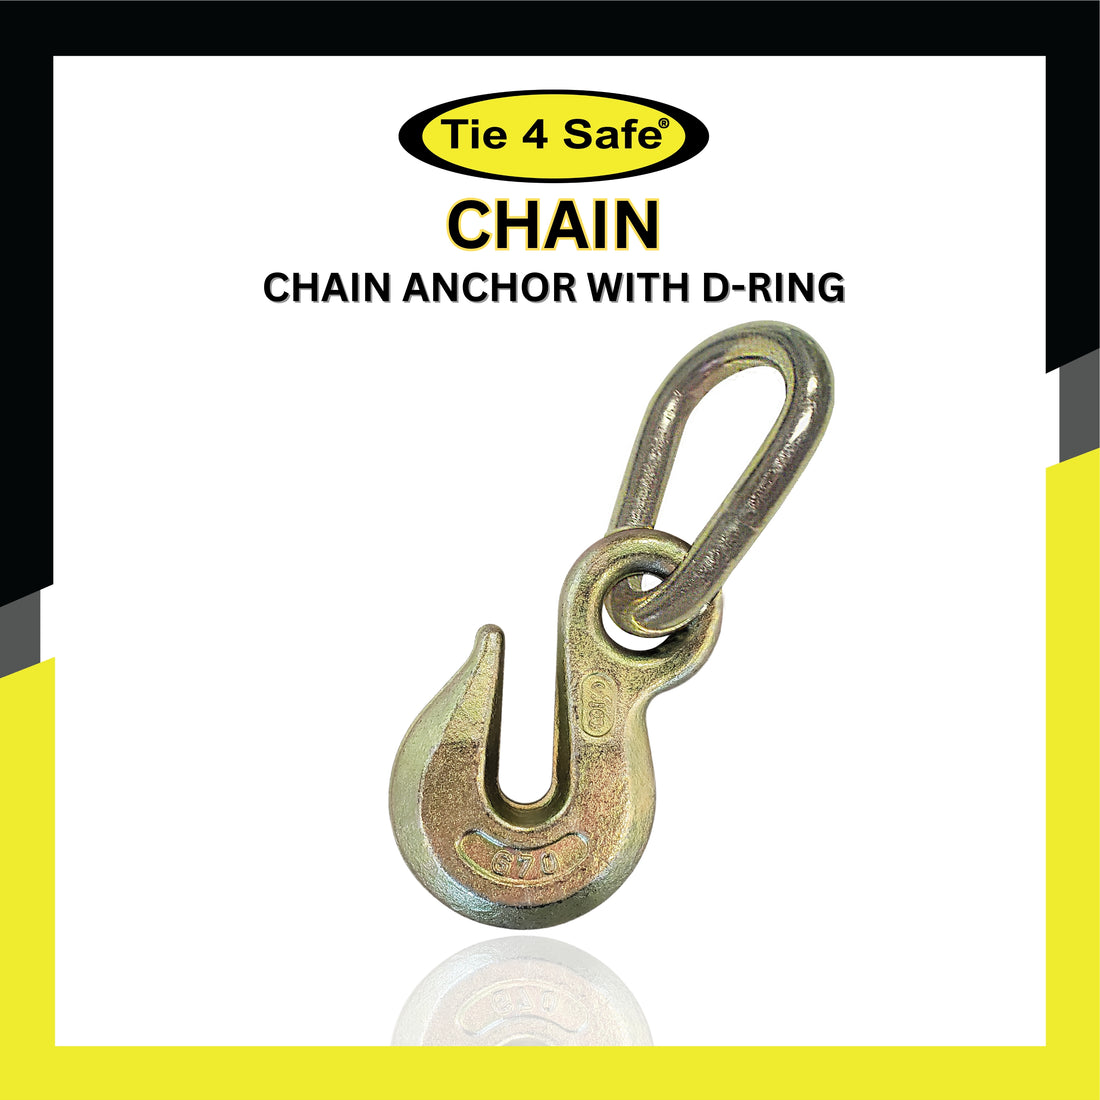 Chain Anchor With D-Ring